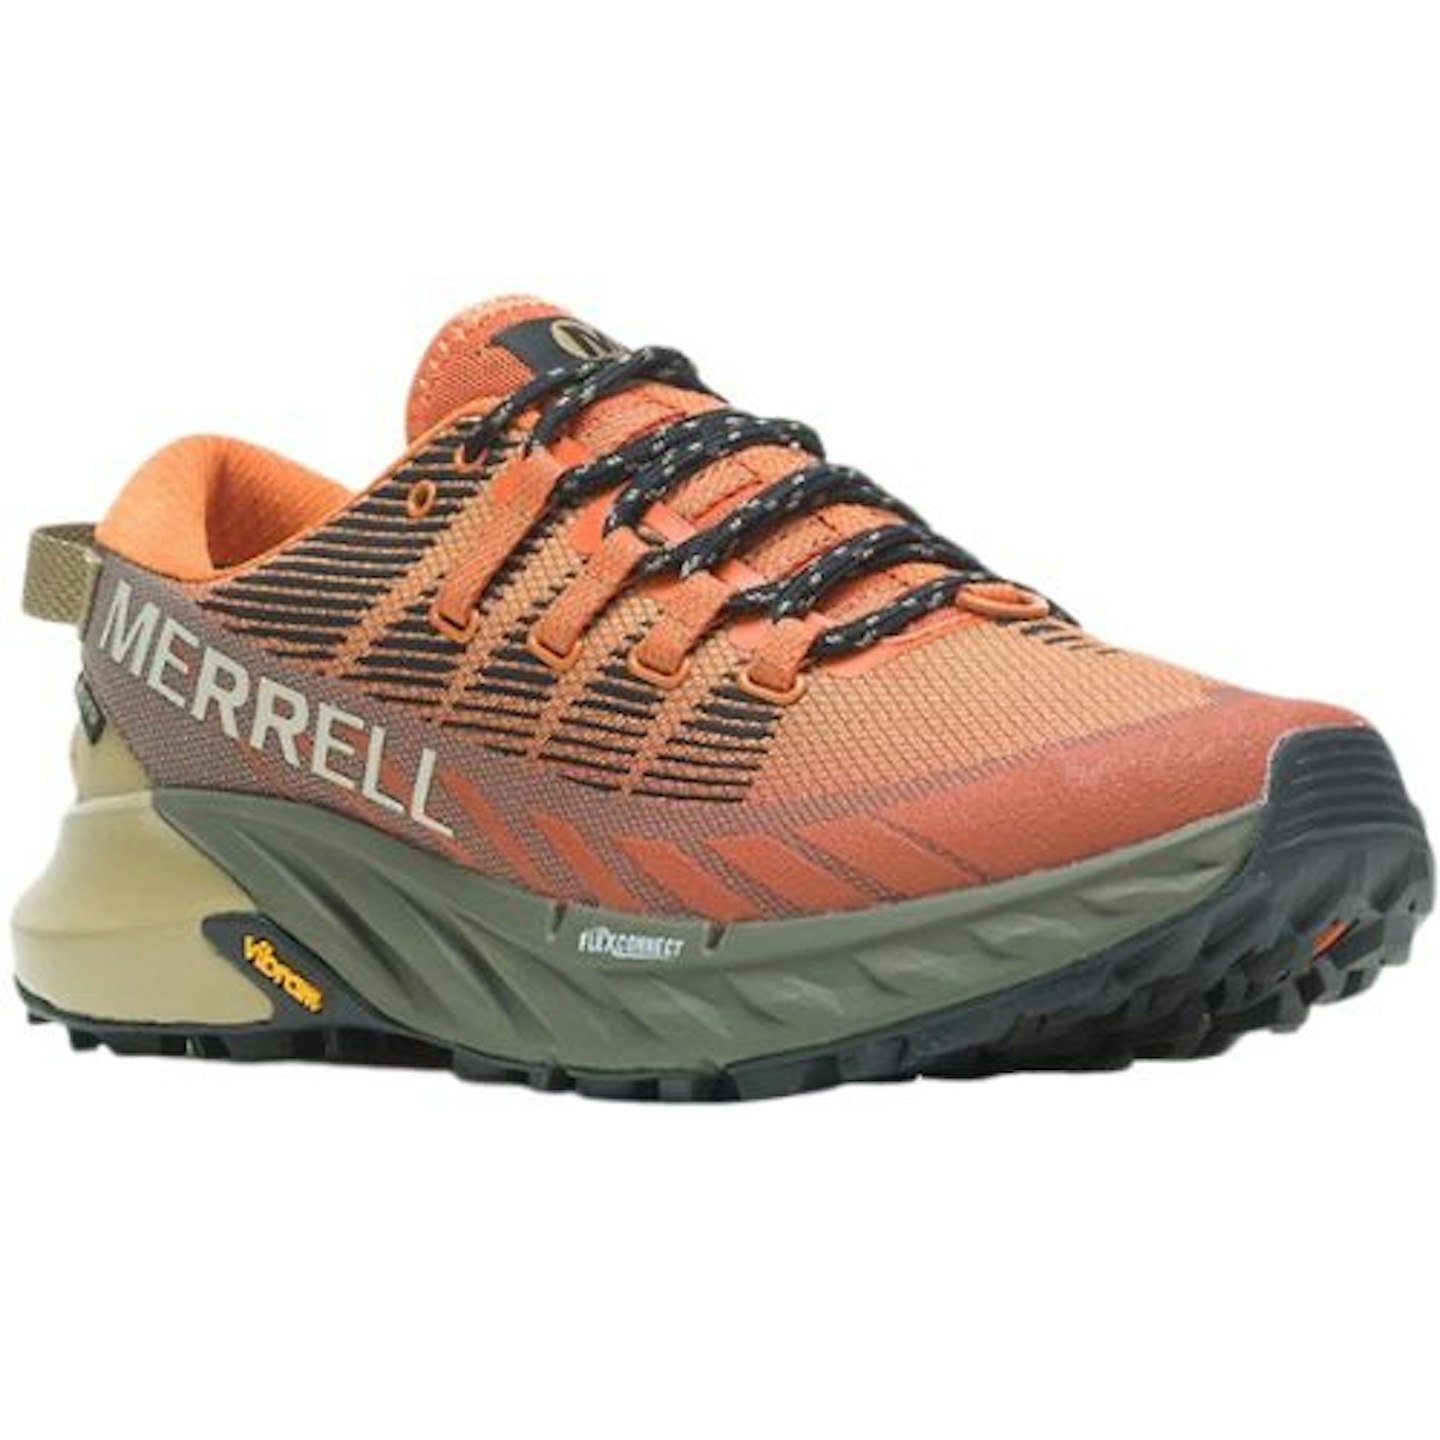 Merrell Agility Peak 4 GTX | Tested and reviewed